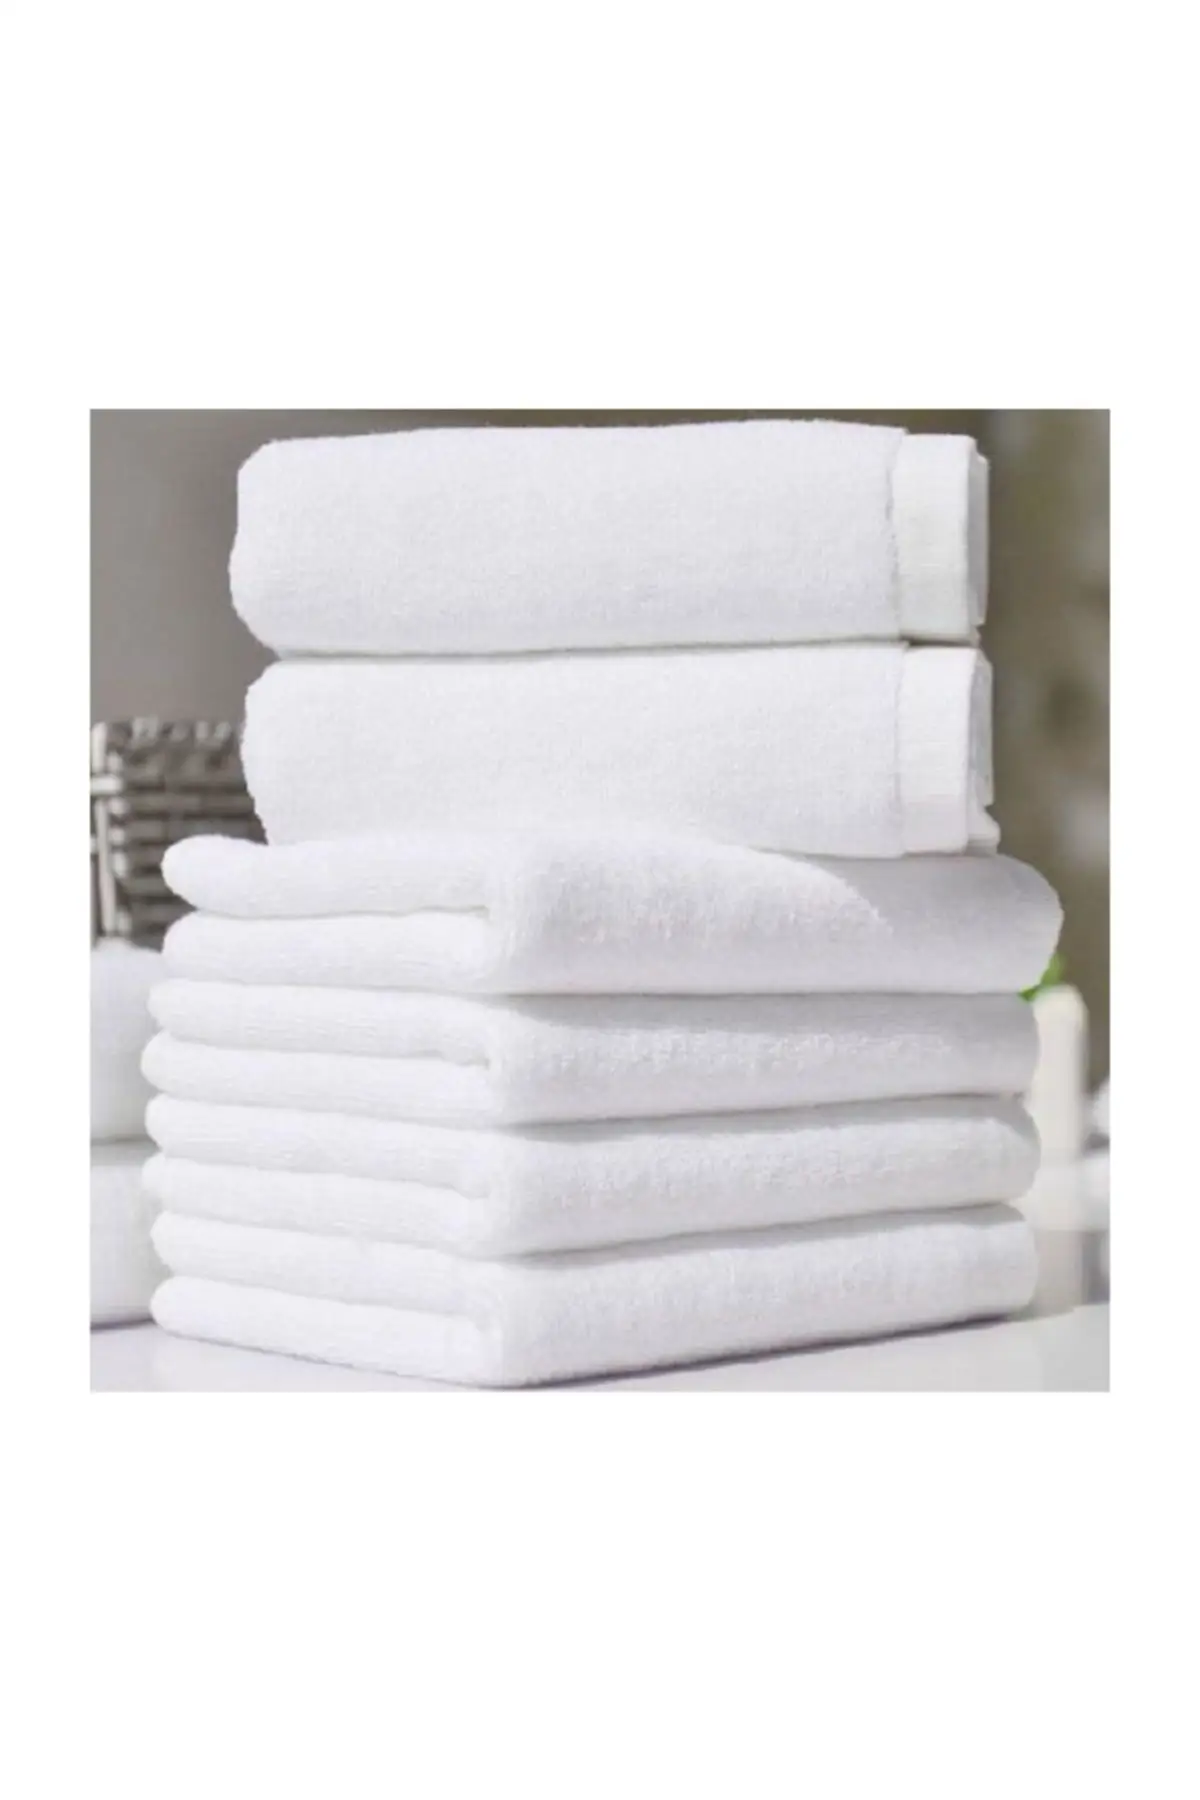 Hotel Type 6 Pcs 50x70 Face Towel White - Hotel Towels, Bath Towels, Hand Towels, Hair Towels, Drying Towels